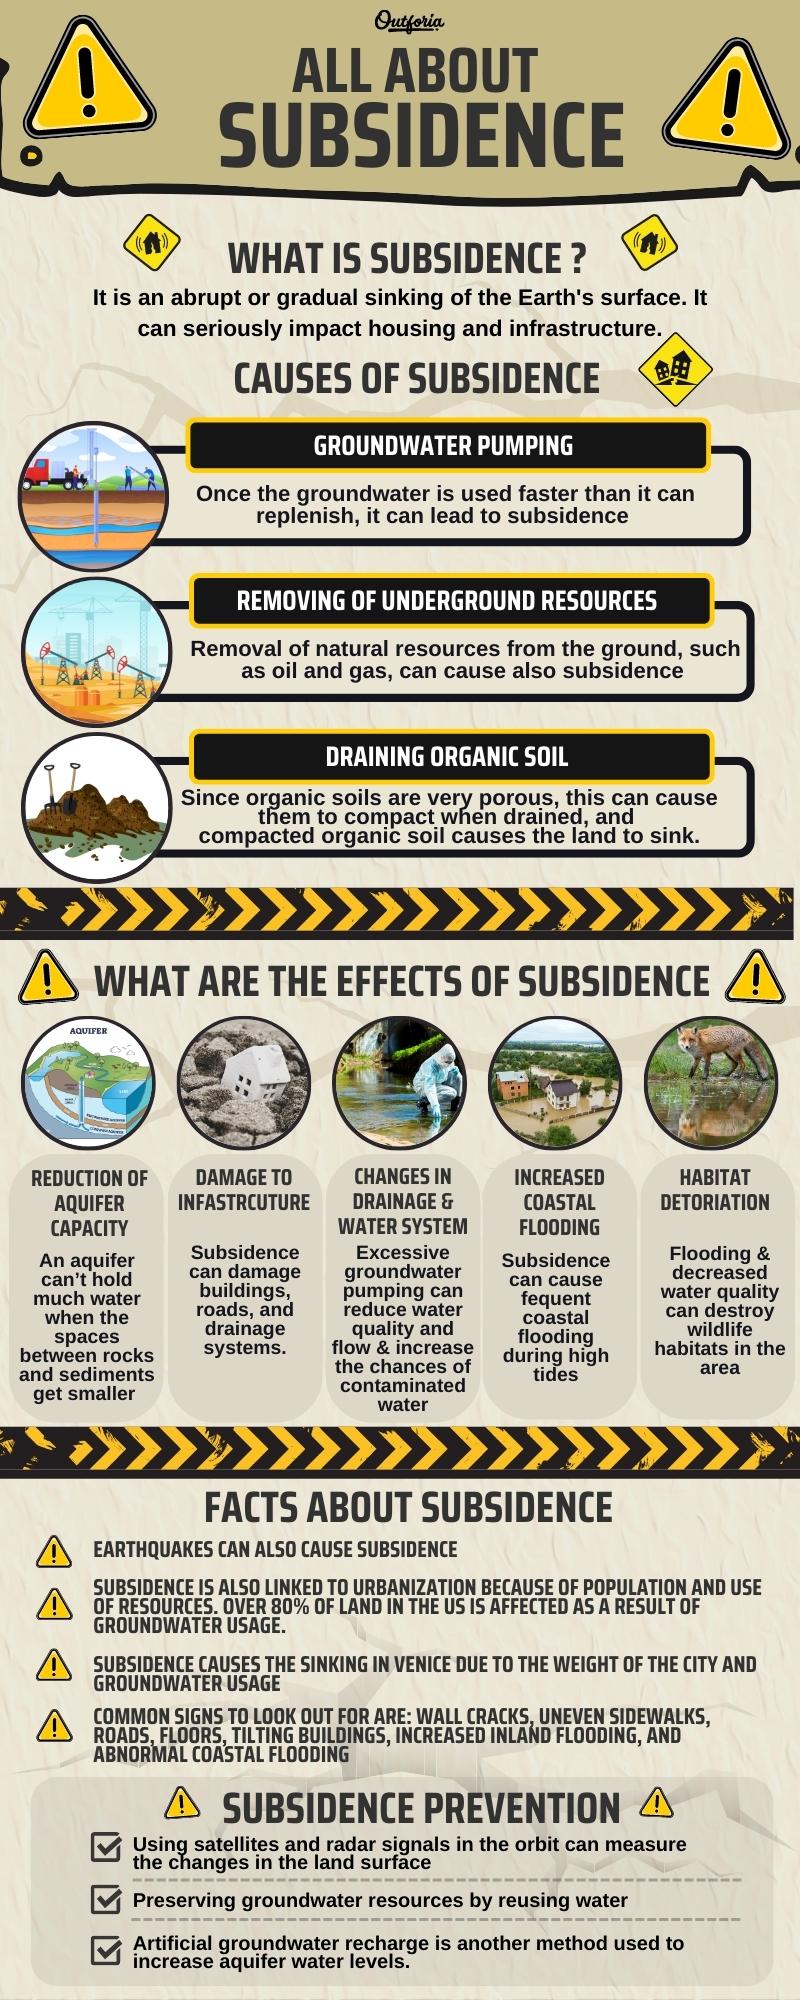 subsidence chart with causes, effects, facts, and prevention